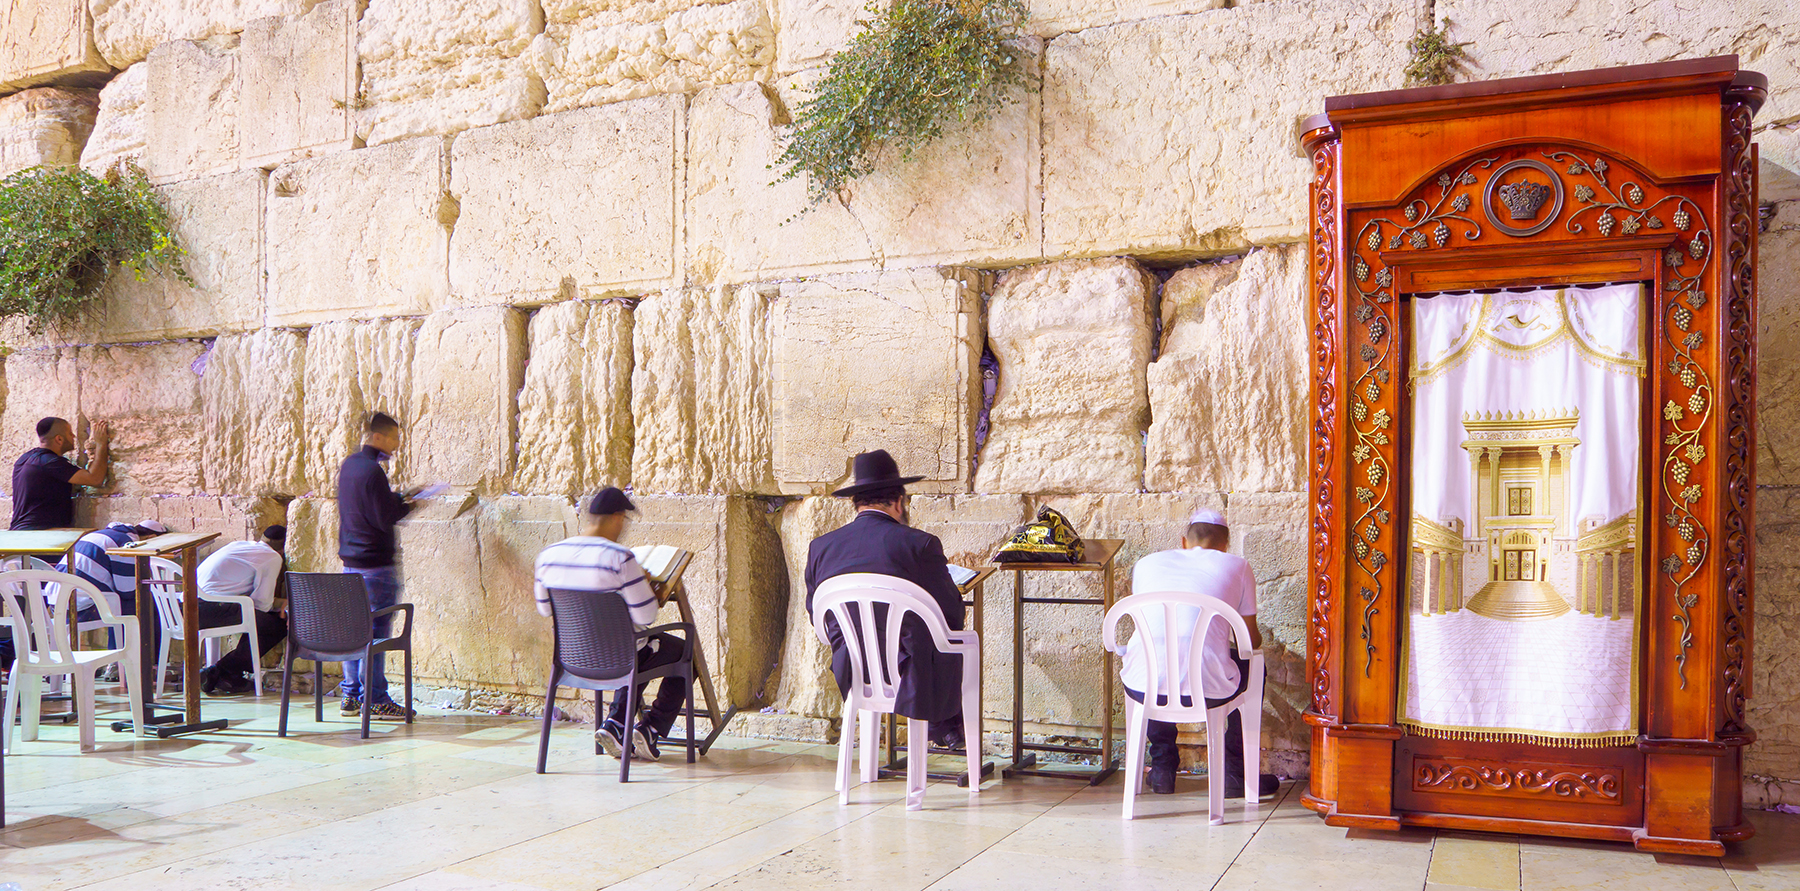 Selichot (Jewish penitential prays) in the western wall